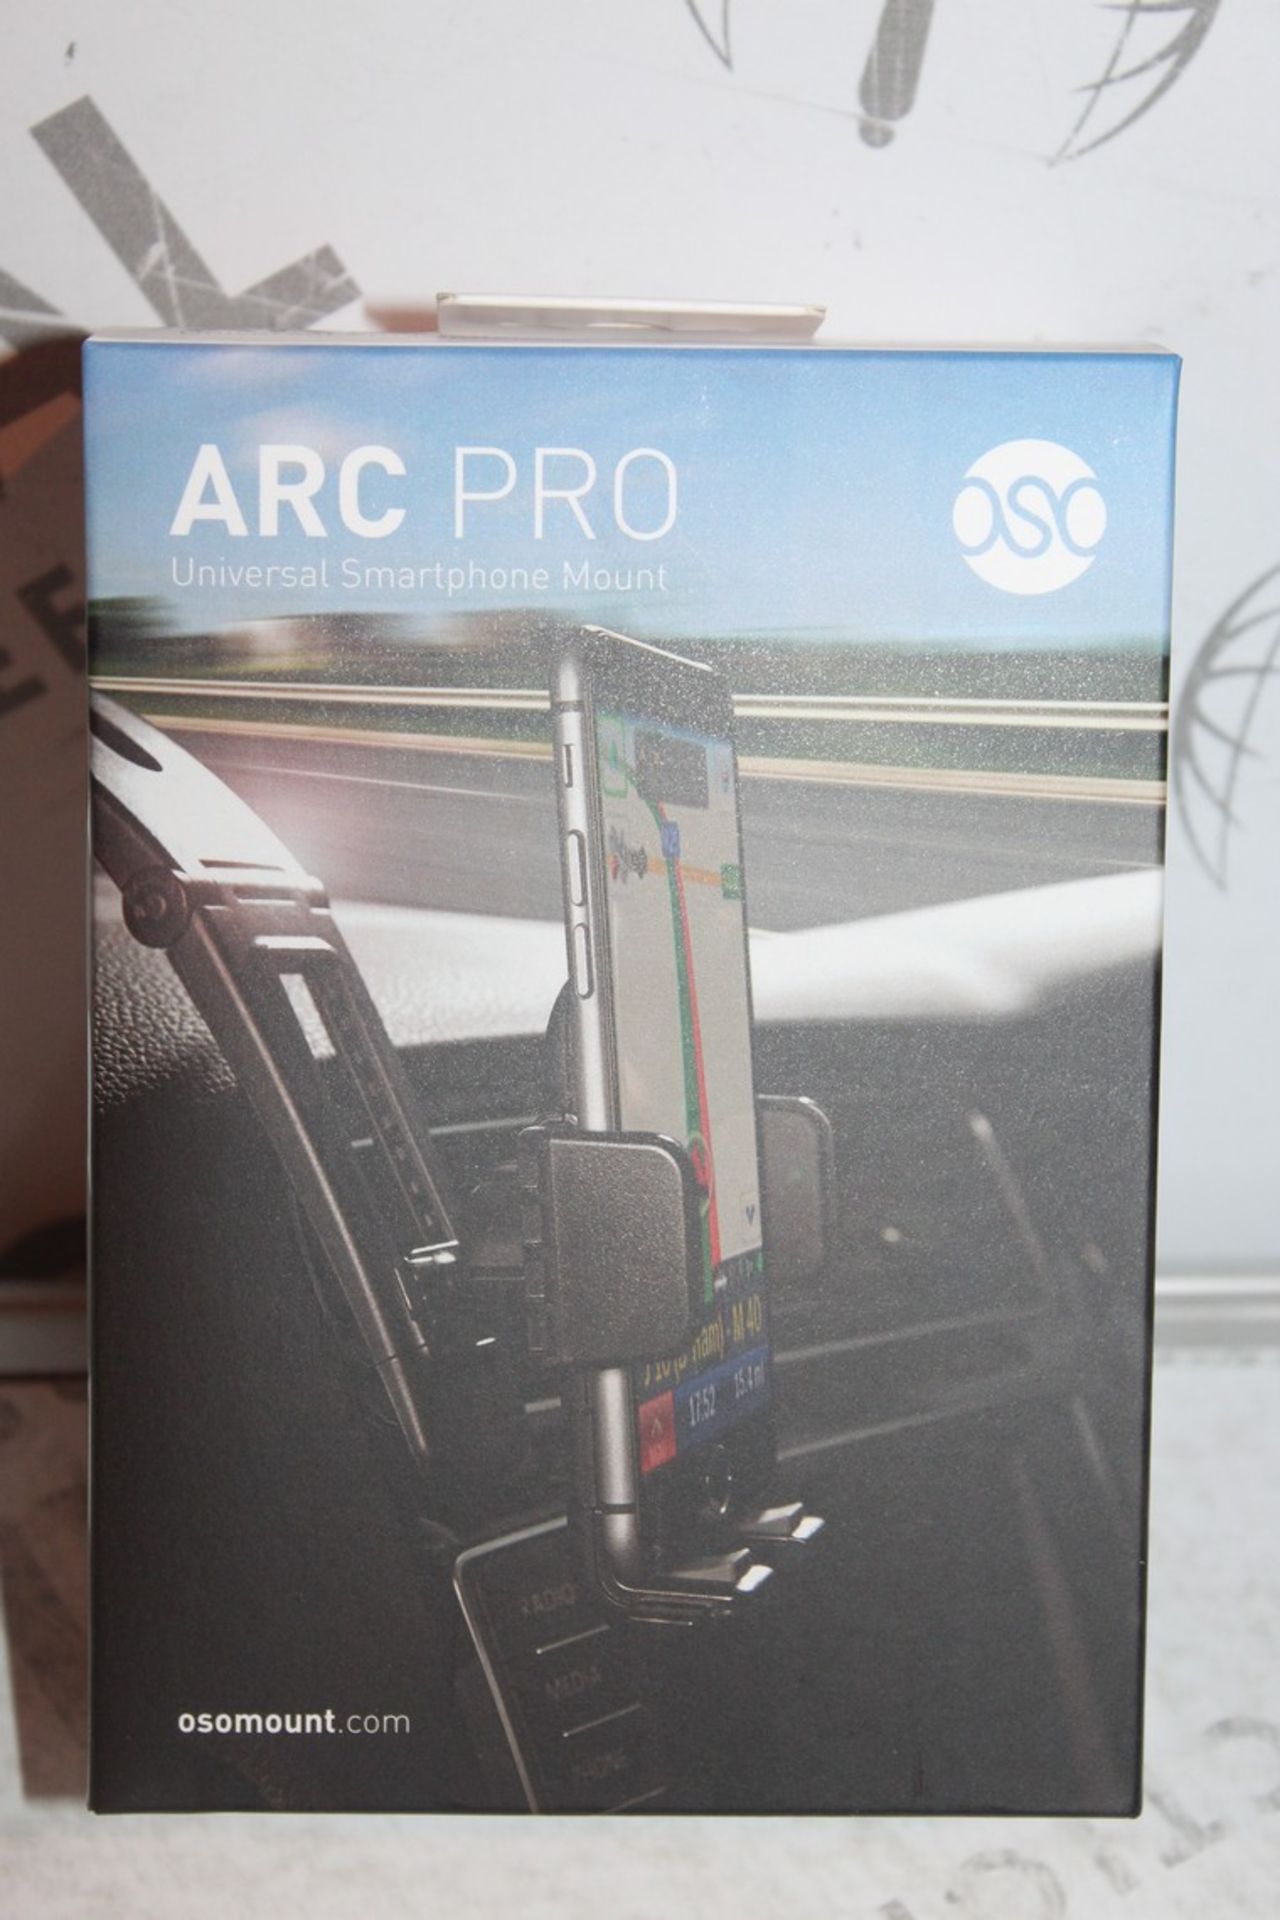 Lot to Contain 5 Asa Arch Pro Universal Smart Phone Mounts Combined RRP £120